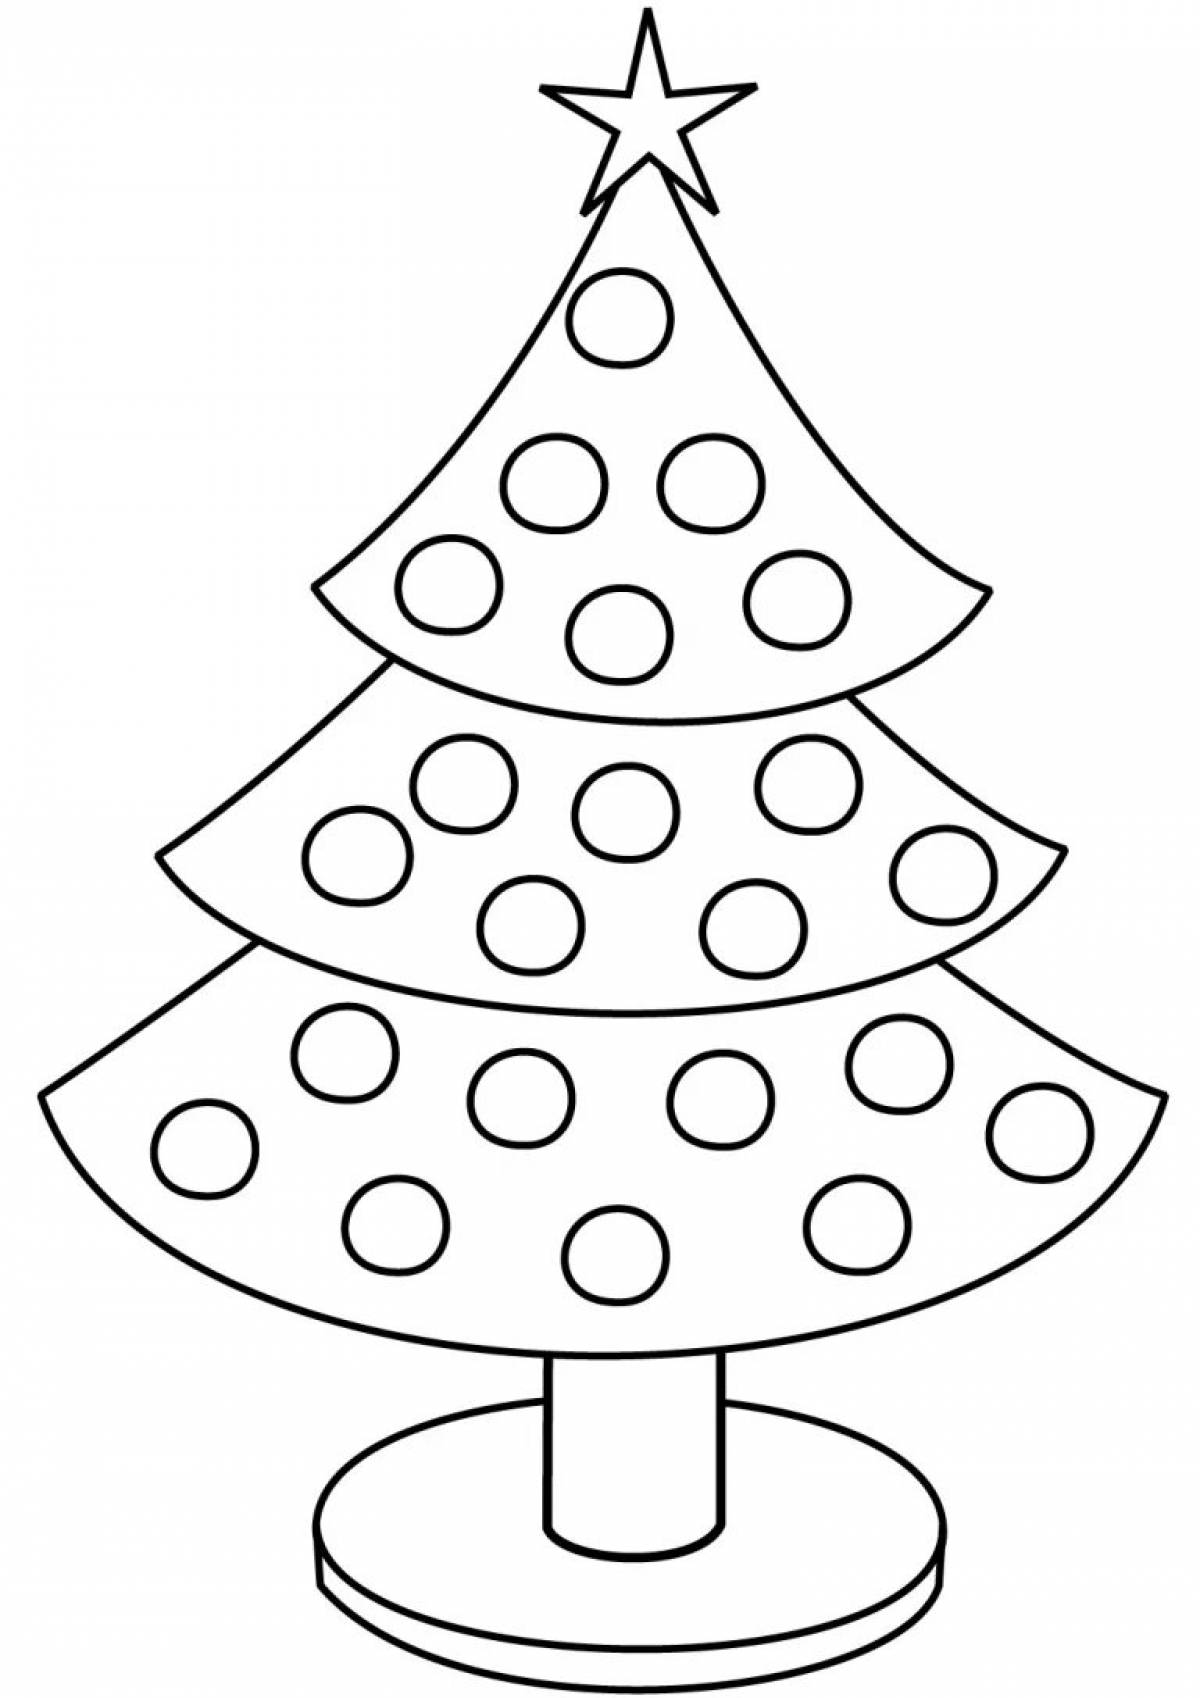 Inviting Christmas tree with balls